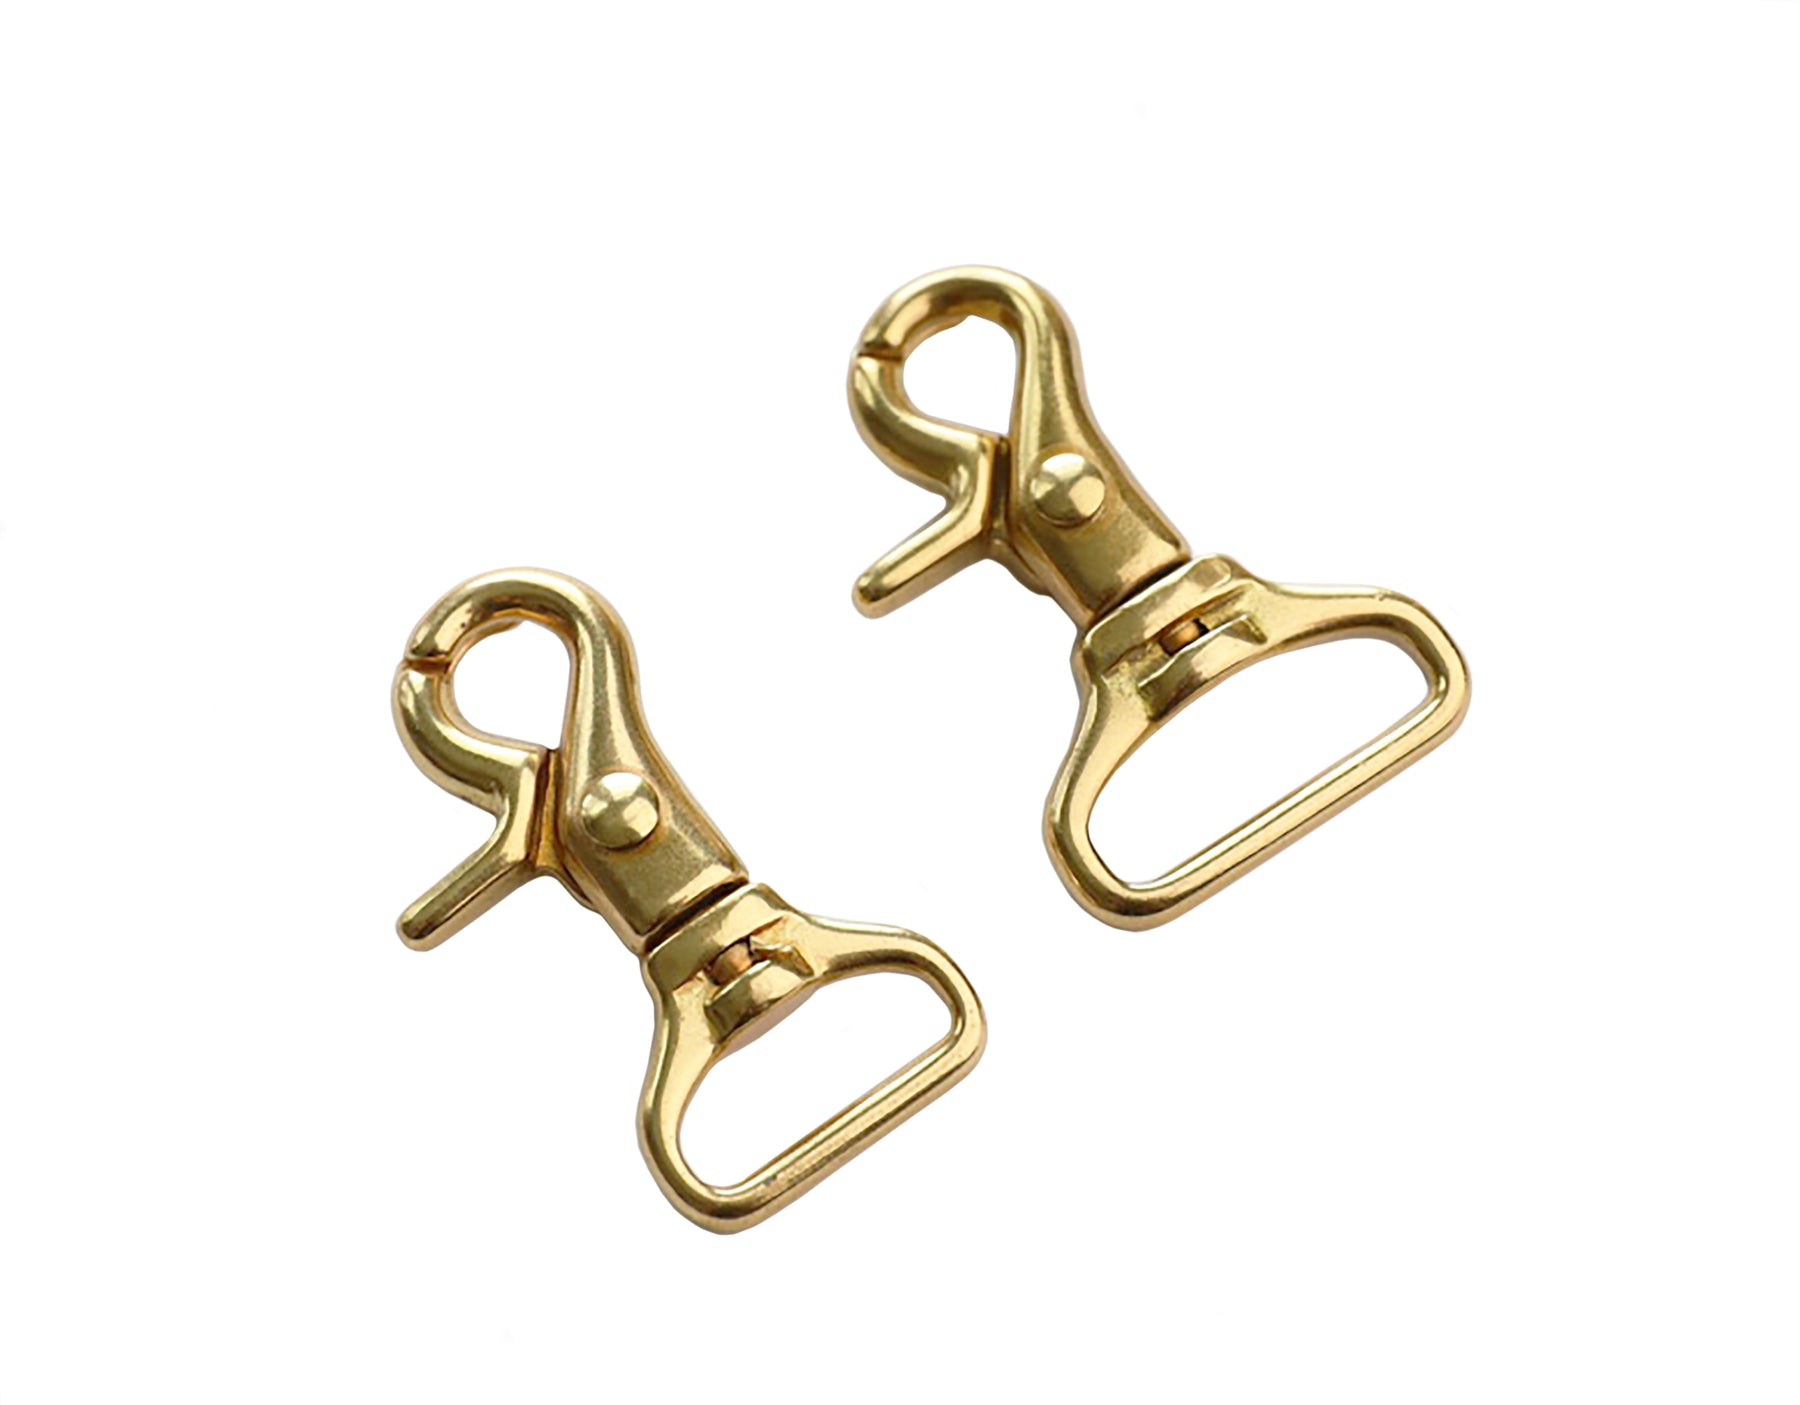 Japanese - Lobster Claw Trigger Snaps - Swivel Flat Base (Solid Brass)